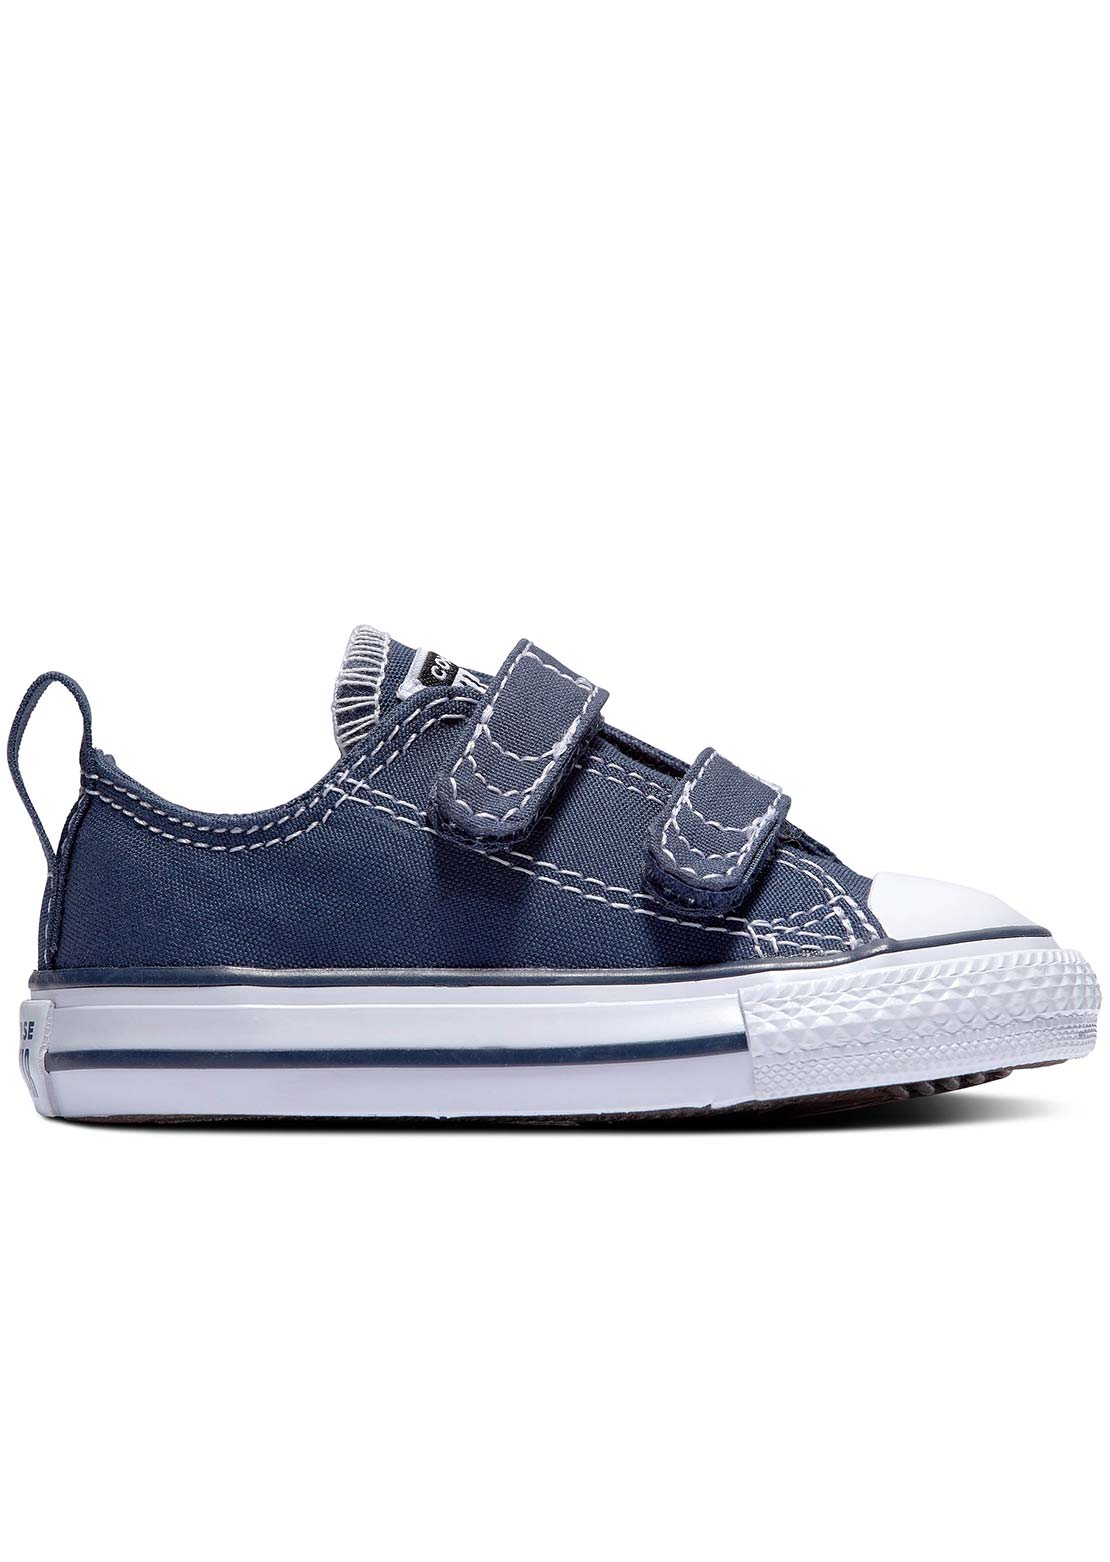 Converse Infant Chuck Taylor All Star 2V Canvas Shoes Athletic Navy/White